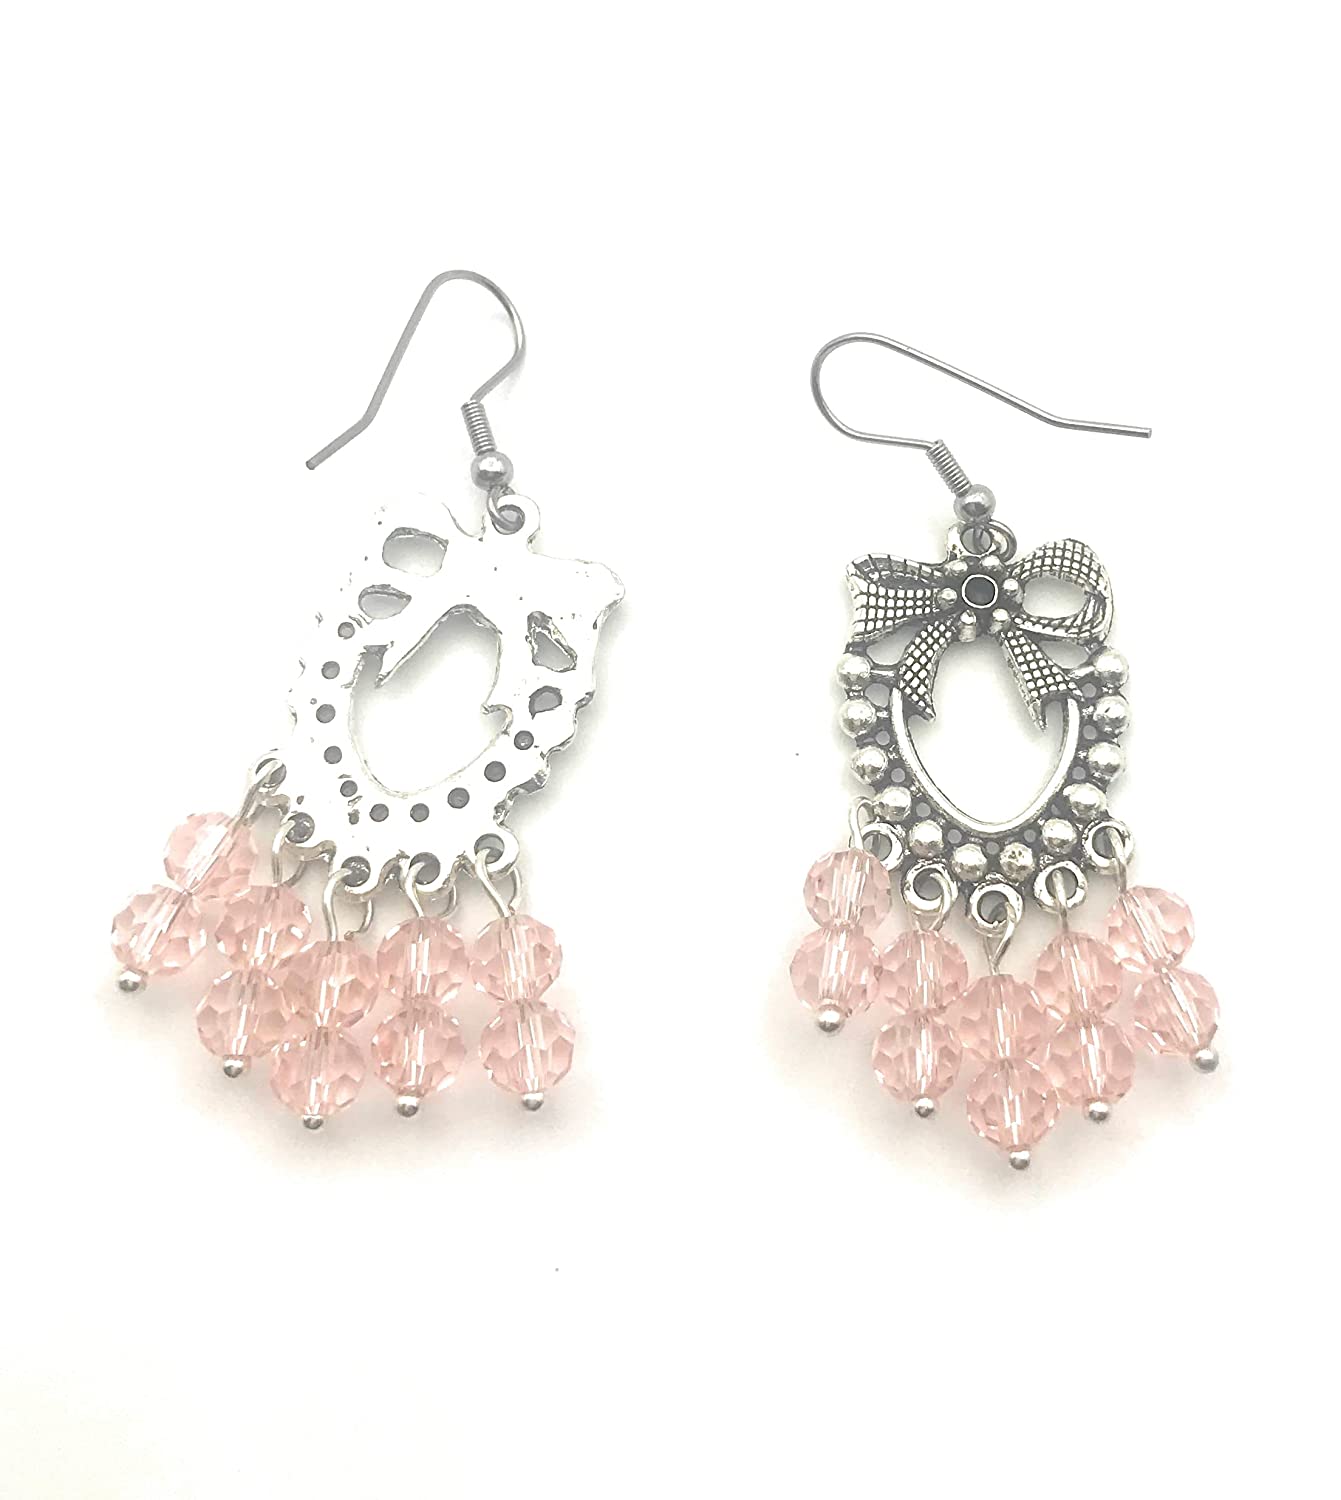 Front and Back of Pink Beaded Chandelier Earrings from Scott D Jewelry Designs